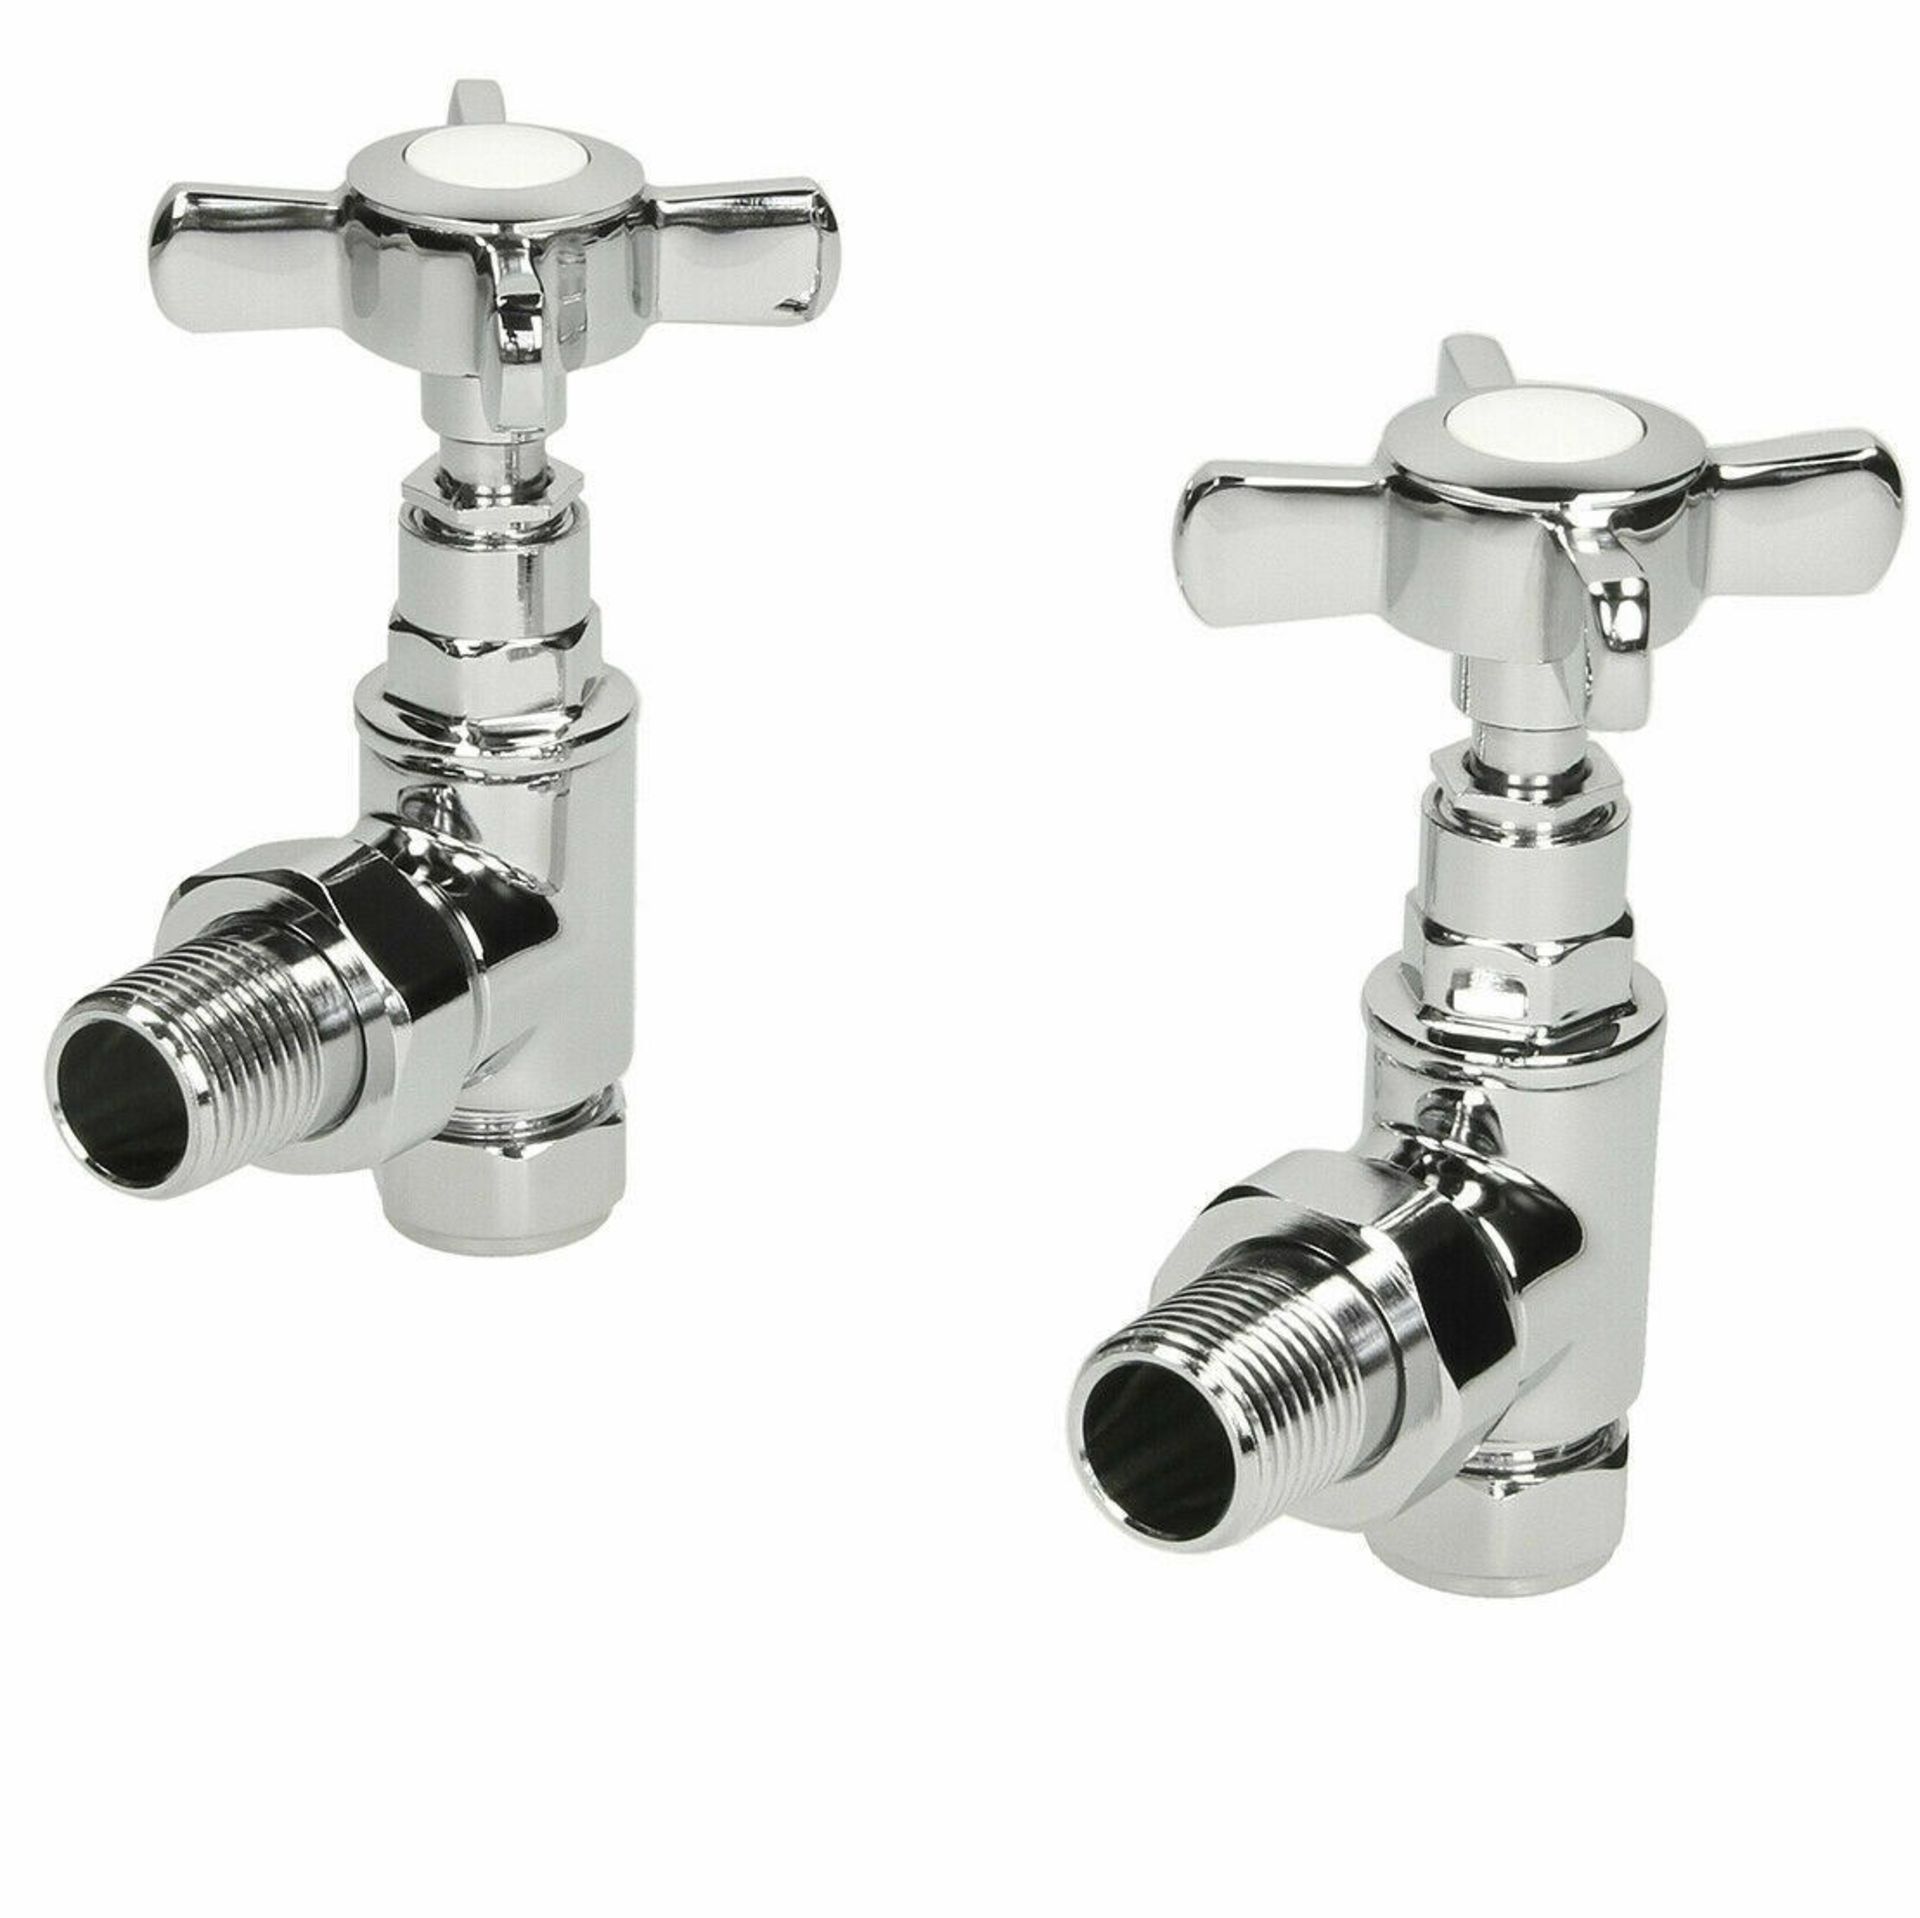 New & Boxed Traditional Angled Heated Towel Rail Radiator Valves Cross Head Pair 15mm Manual.For